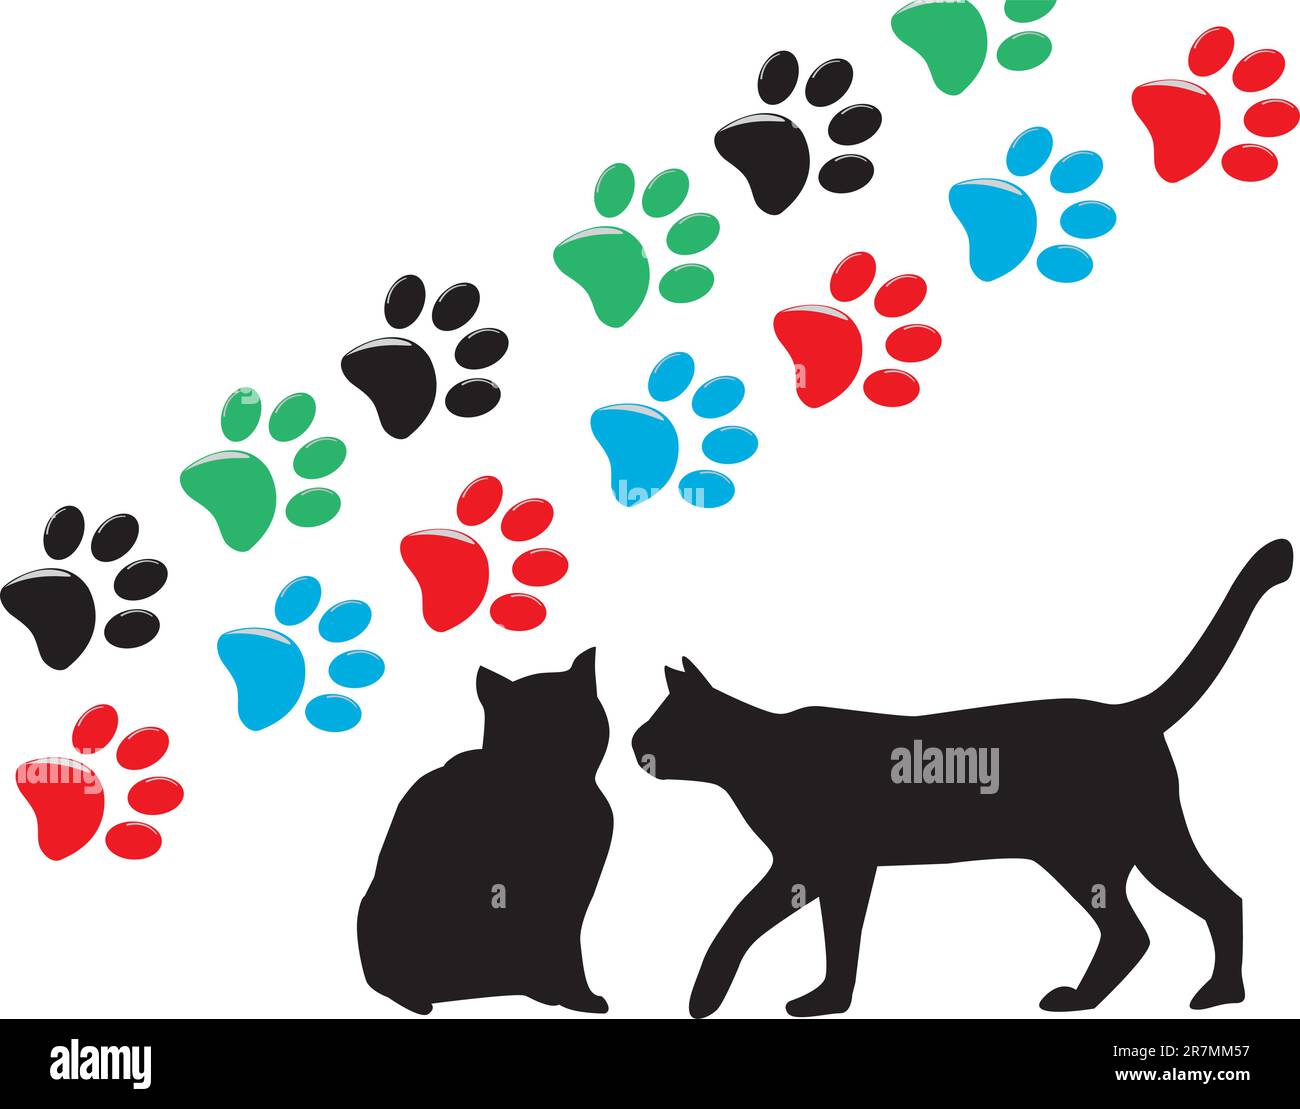 vector illustration of cats silhouettes and cats paws Stock Vector